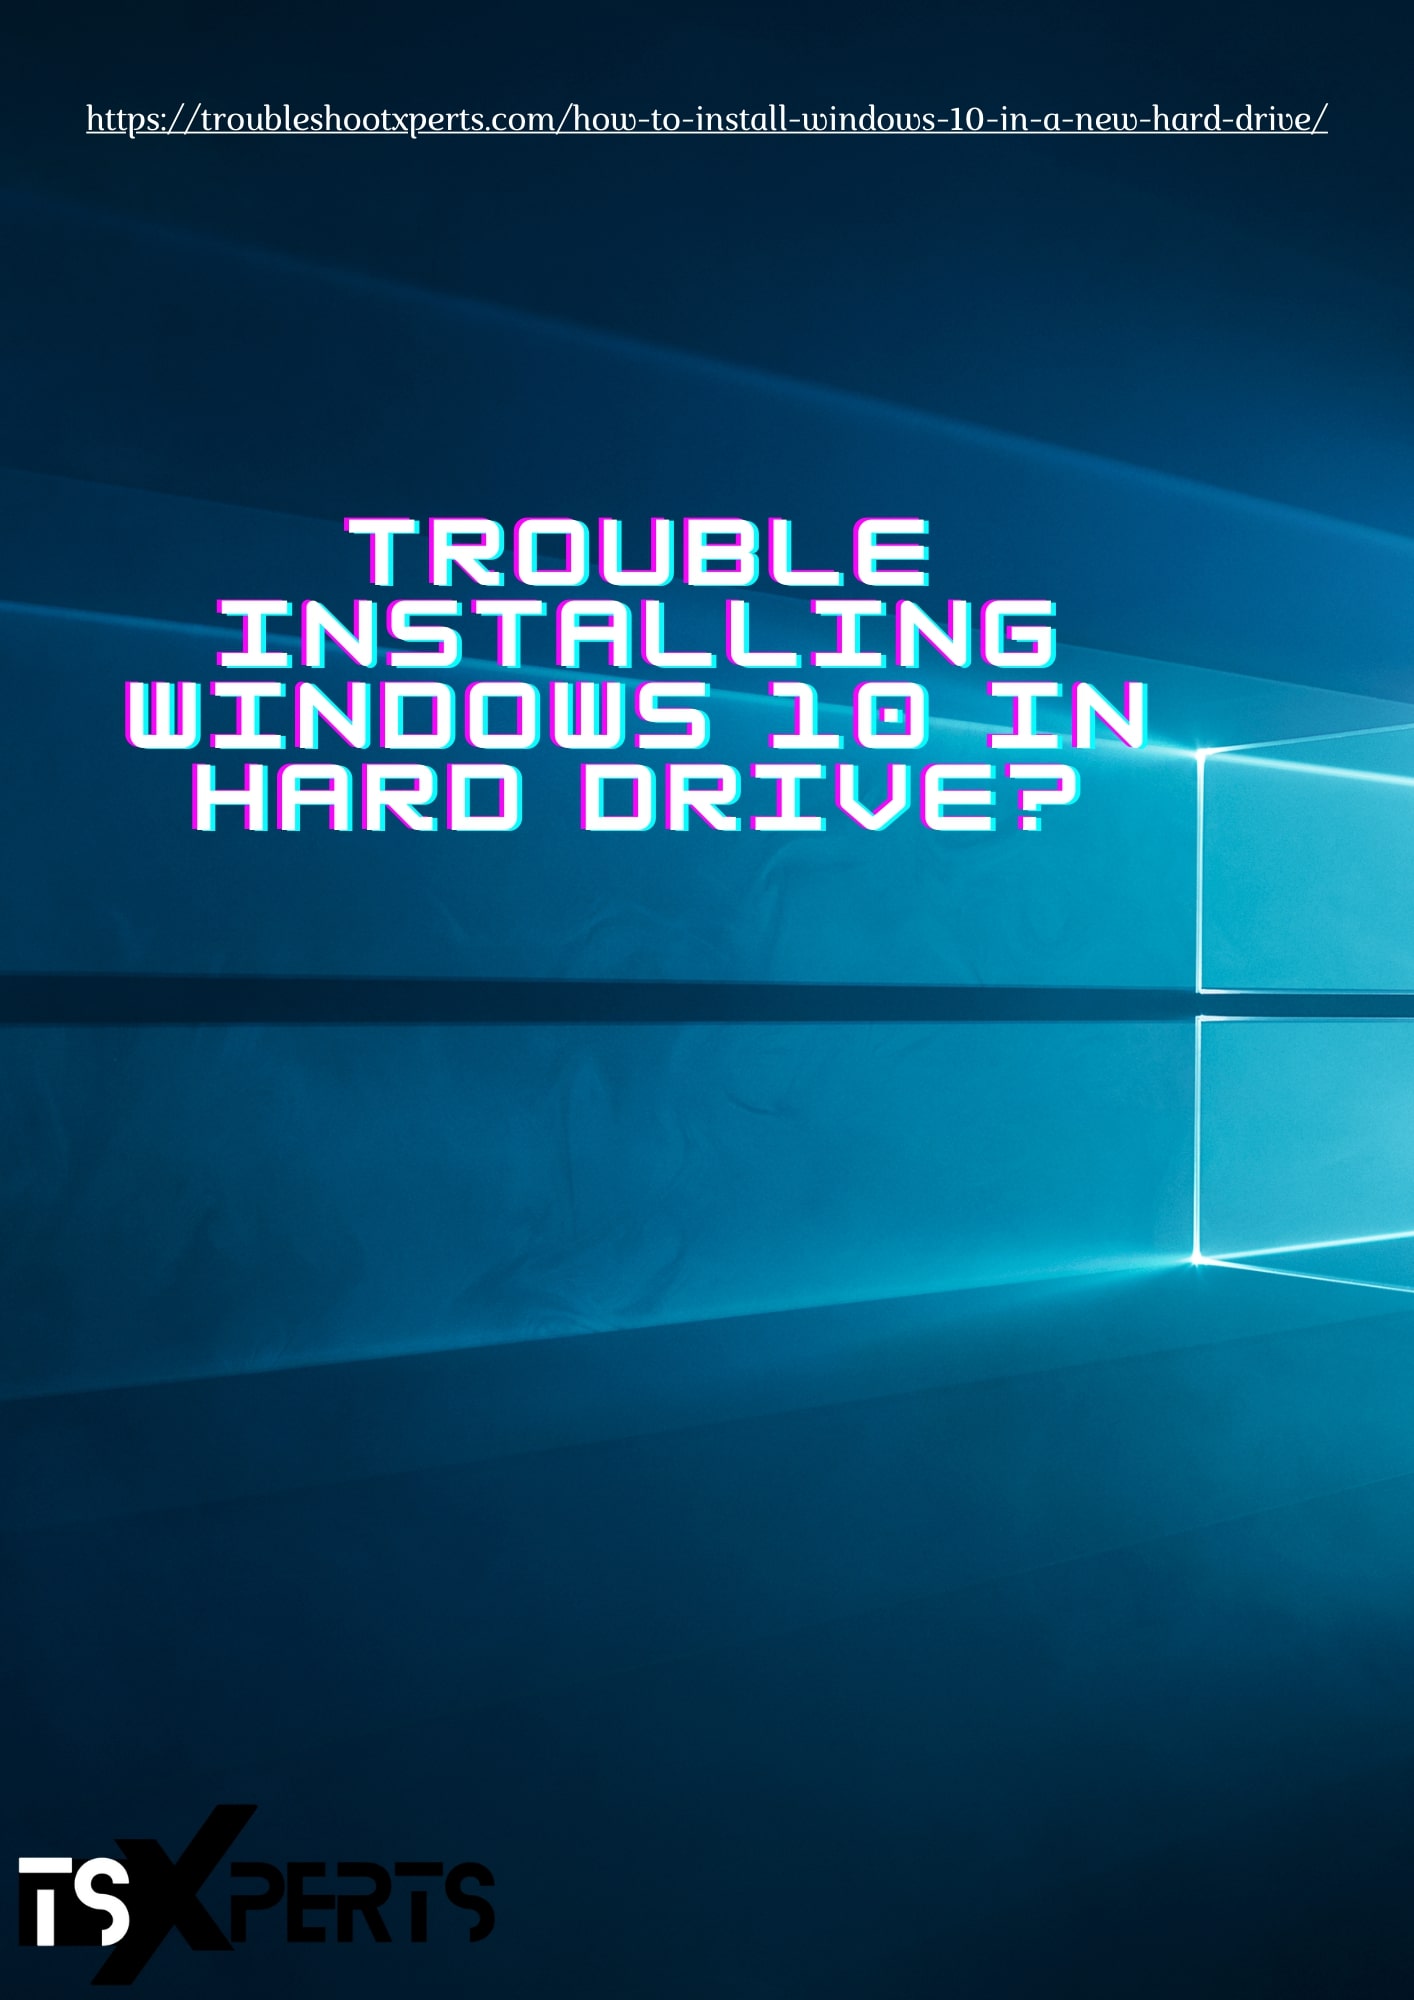 How to Install Windows 10 in a N